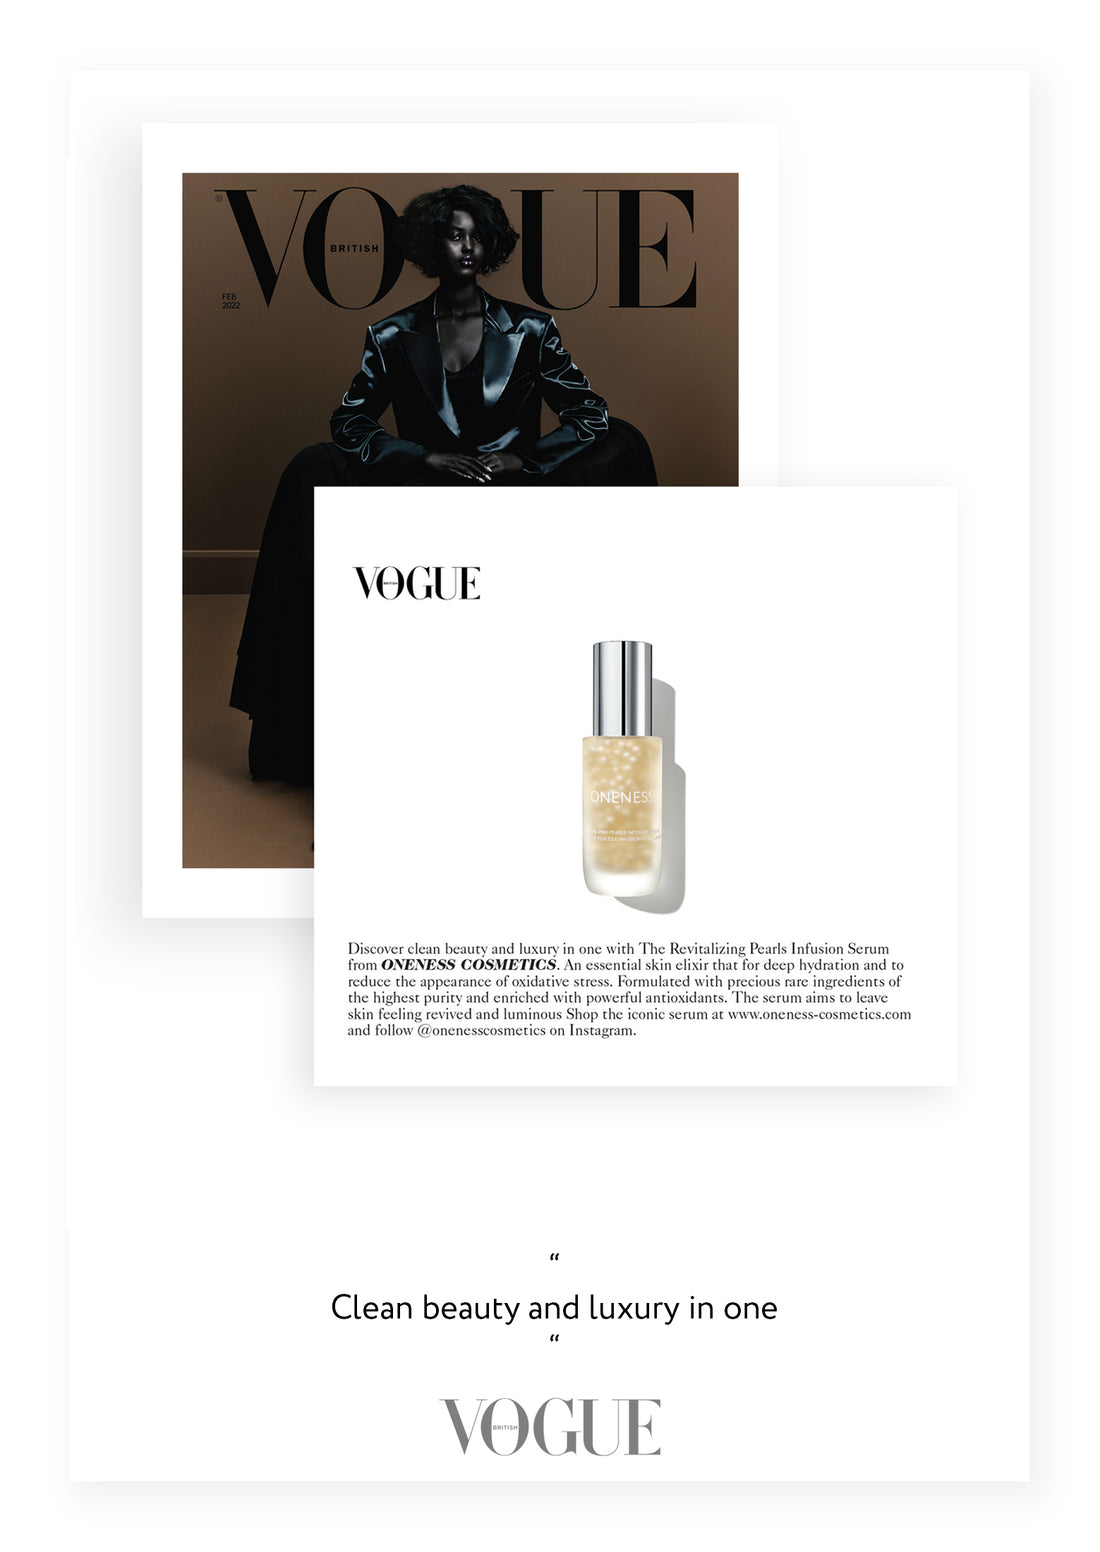 AS FEATURED IN VOGUE